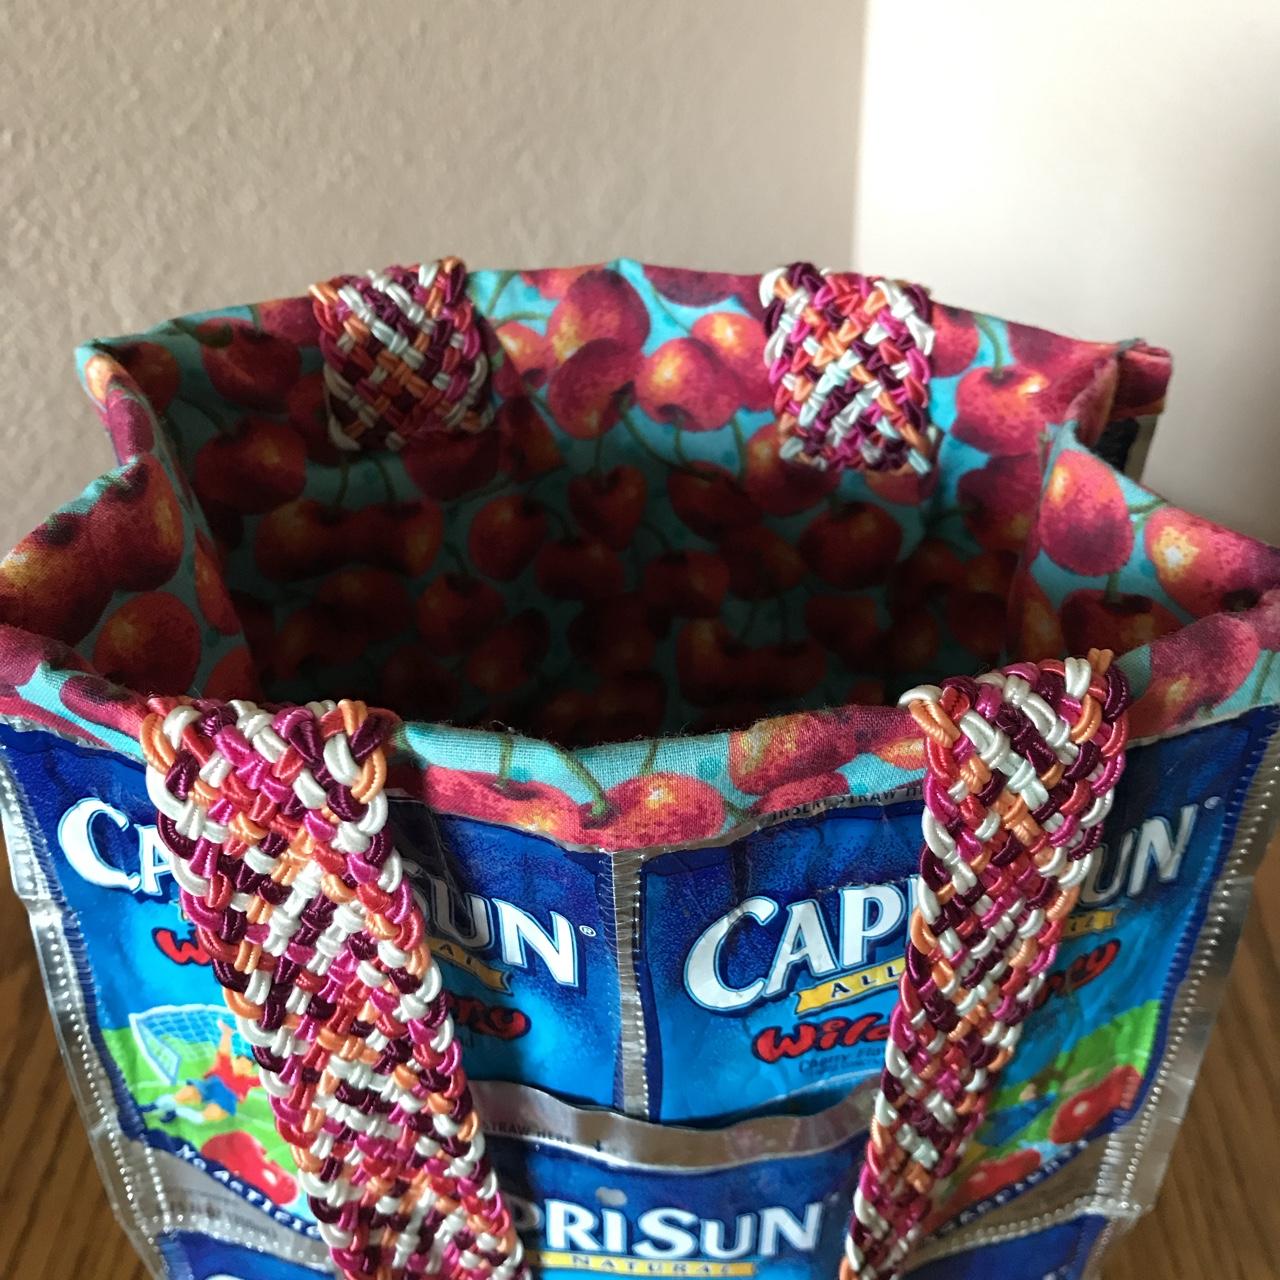 Recycled Capri-Sun Coin Purse : 5 Steps - Instructables